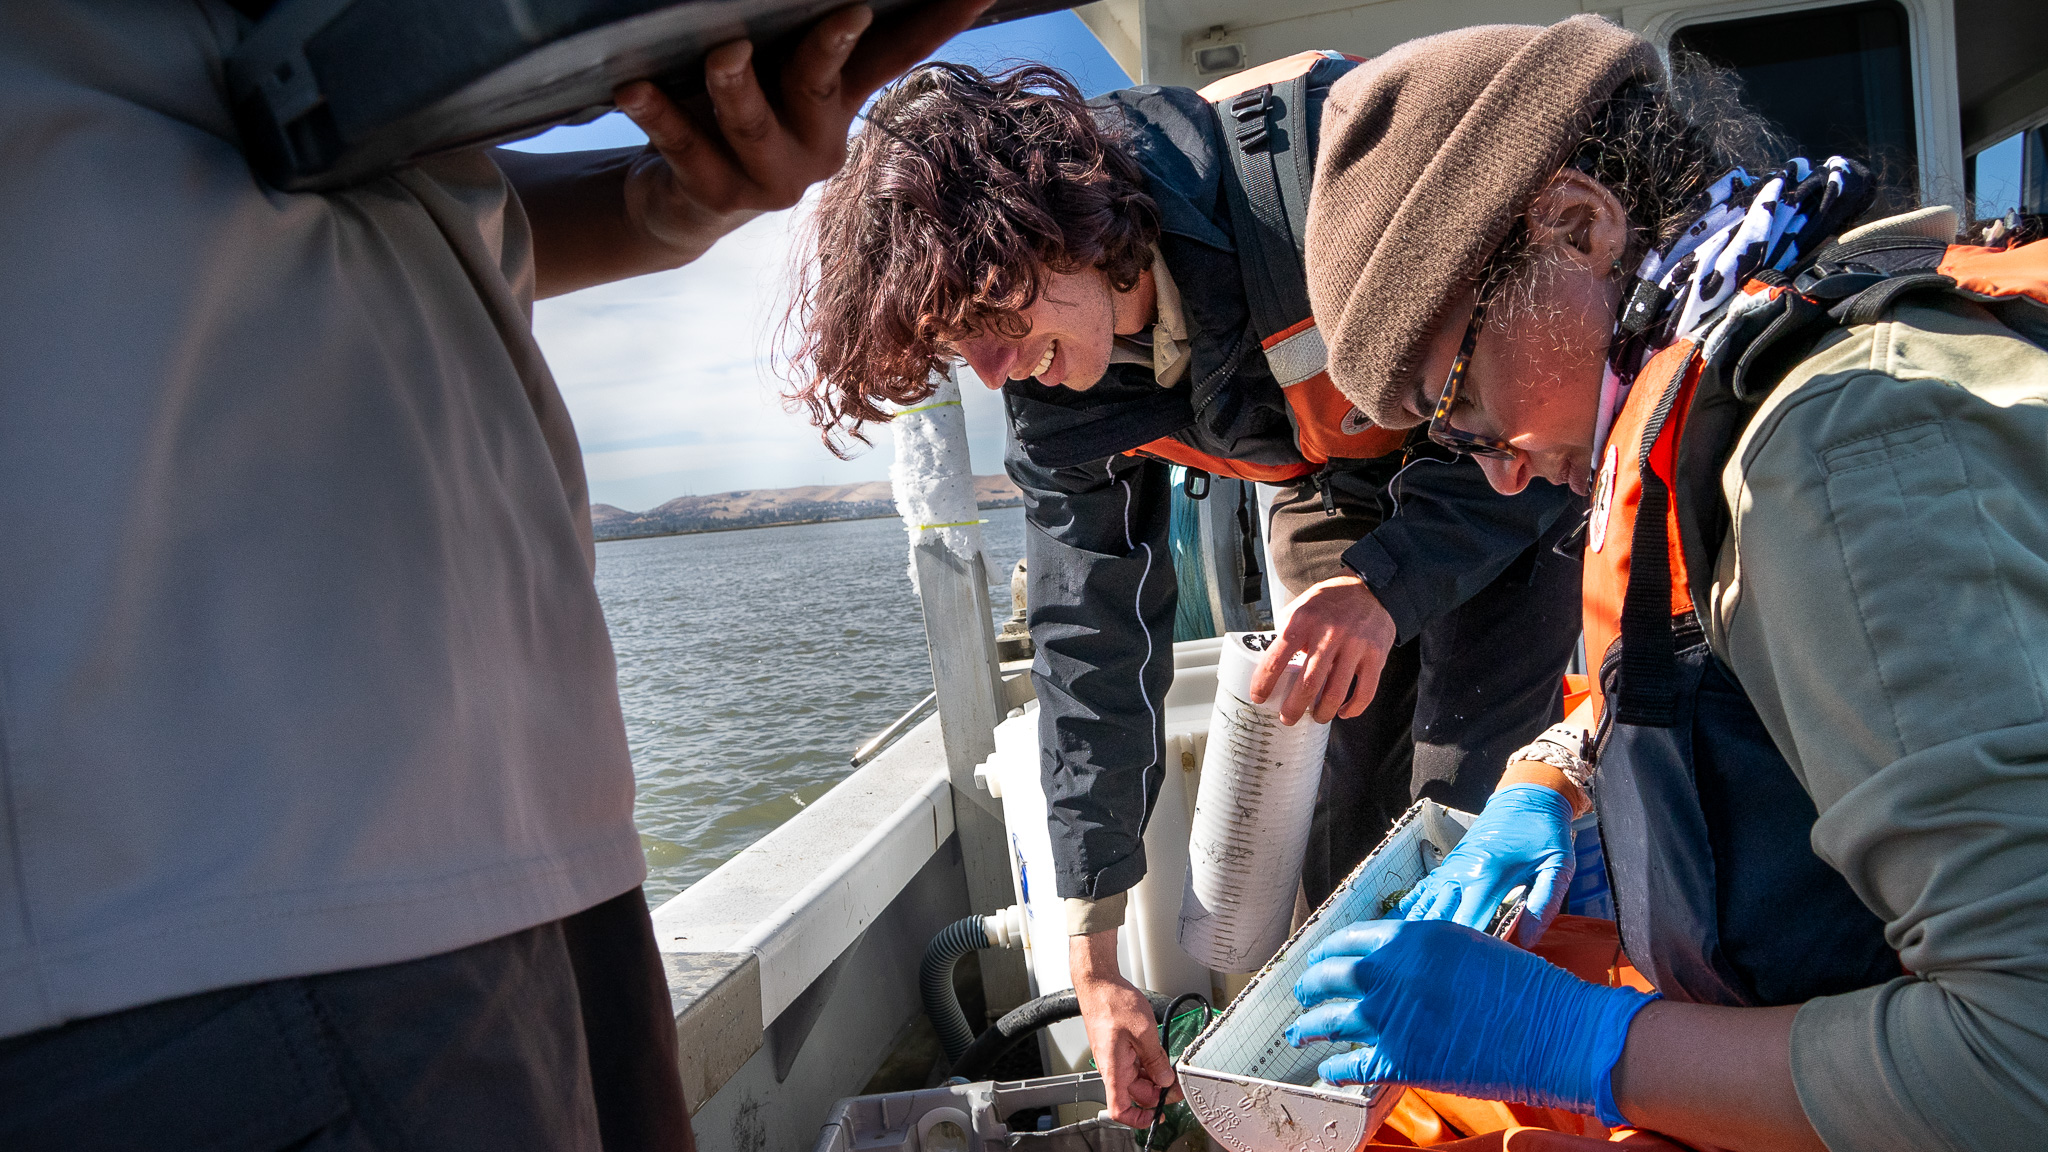 Josafat and the U.S. Fish & Wildlife Service team measure the lengths of the fish they caught and log the data. 